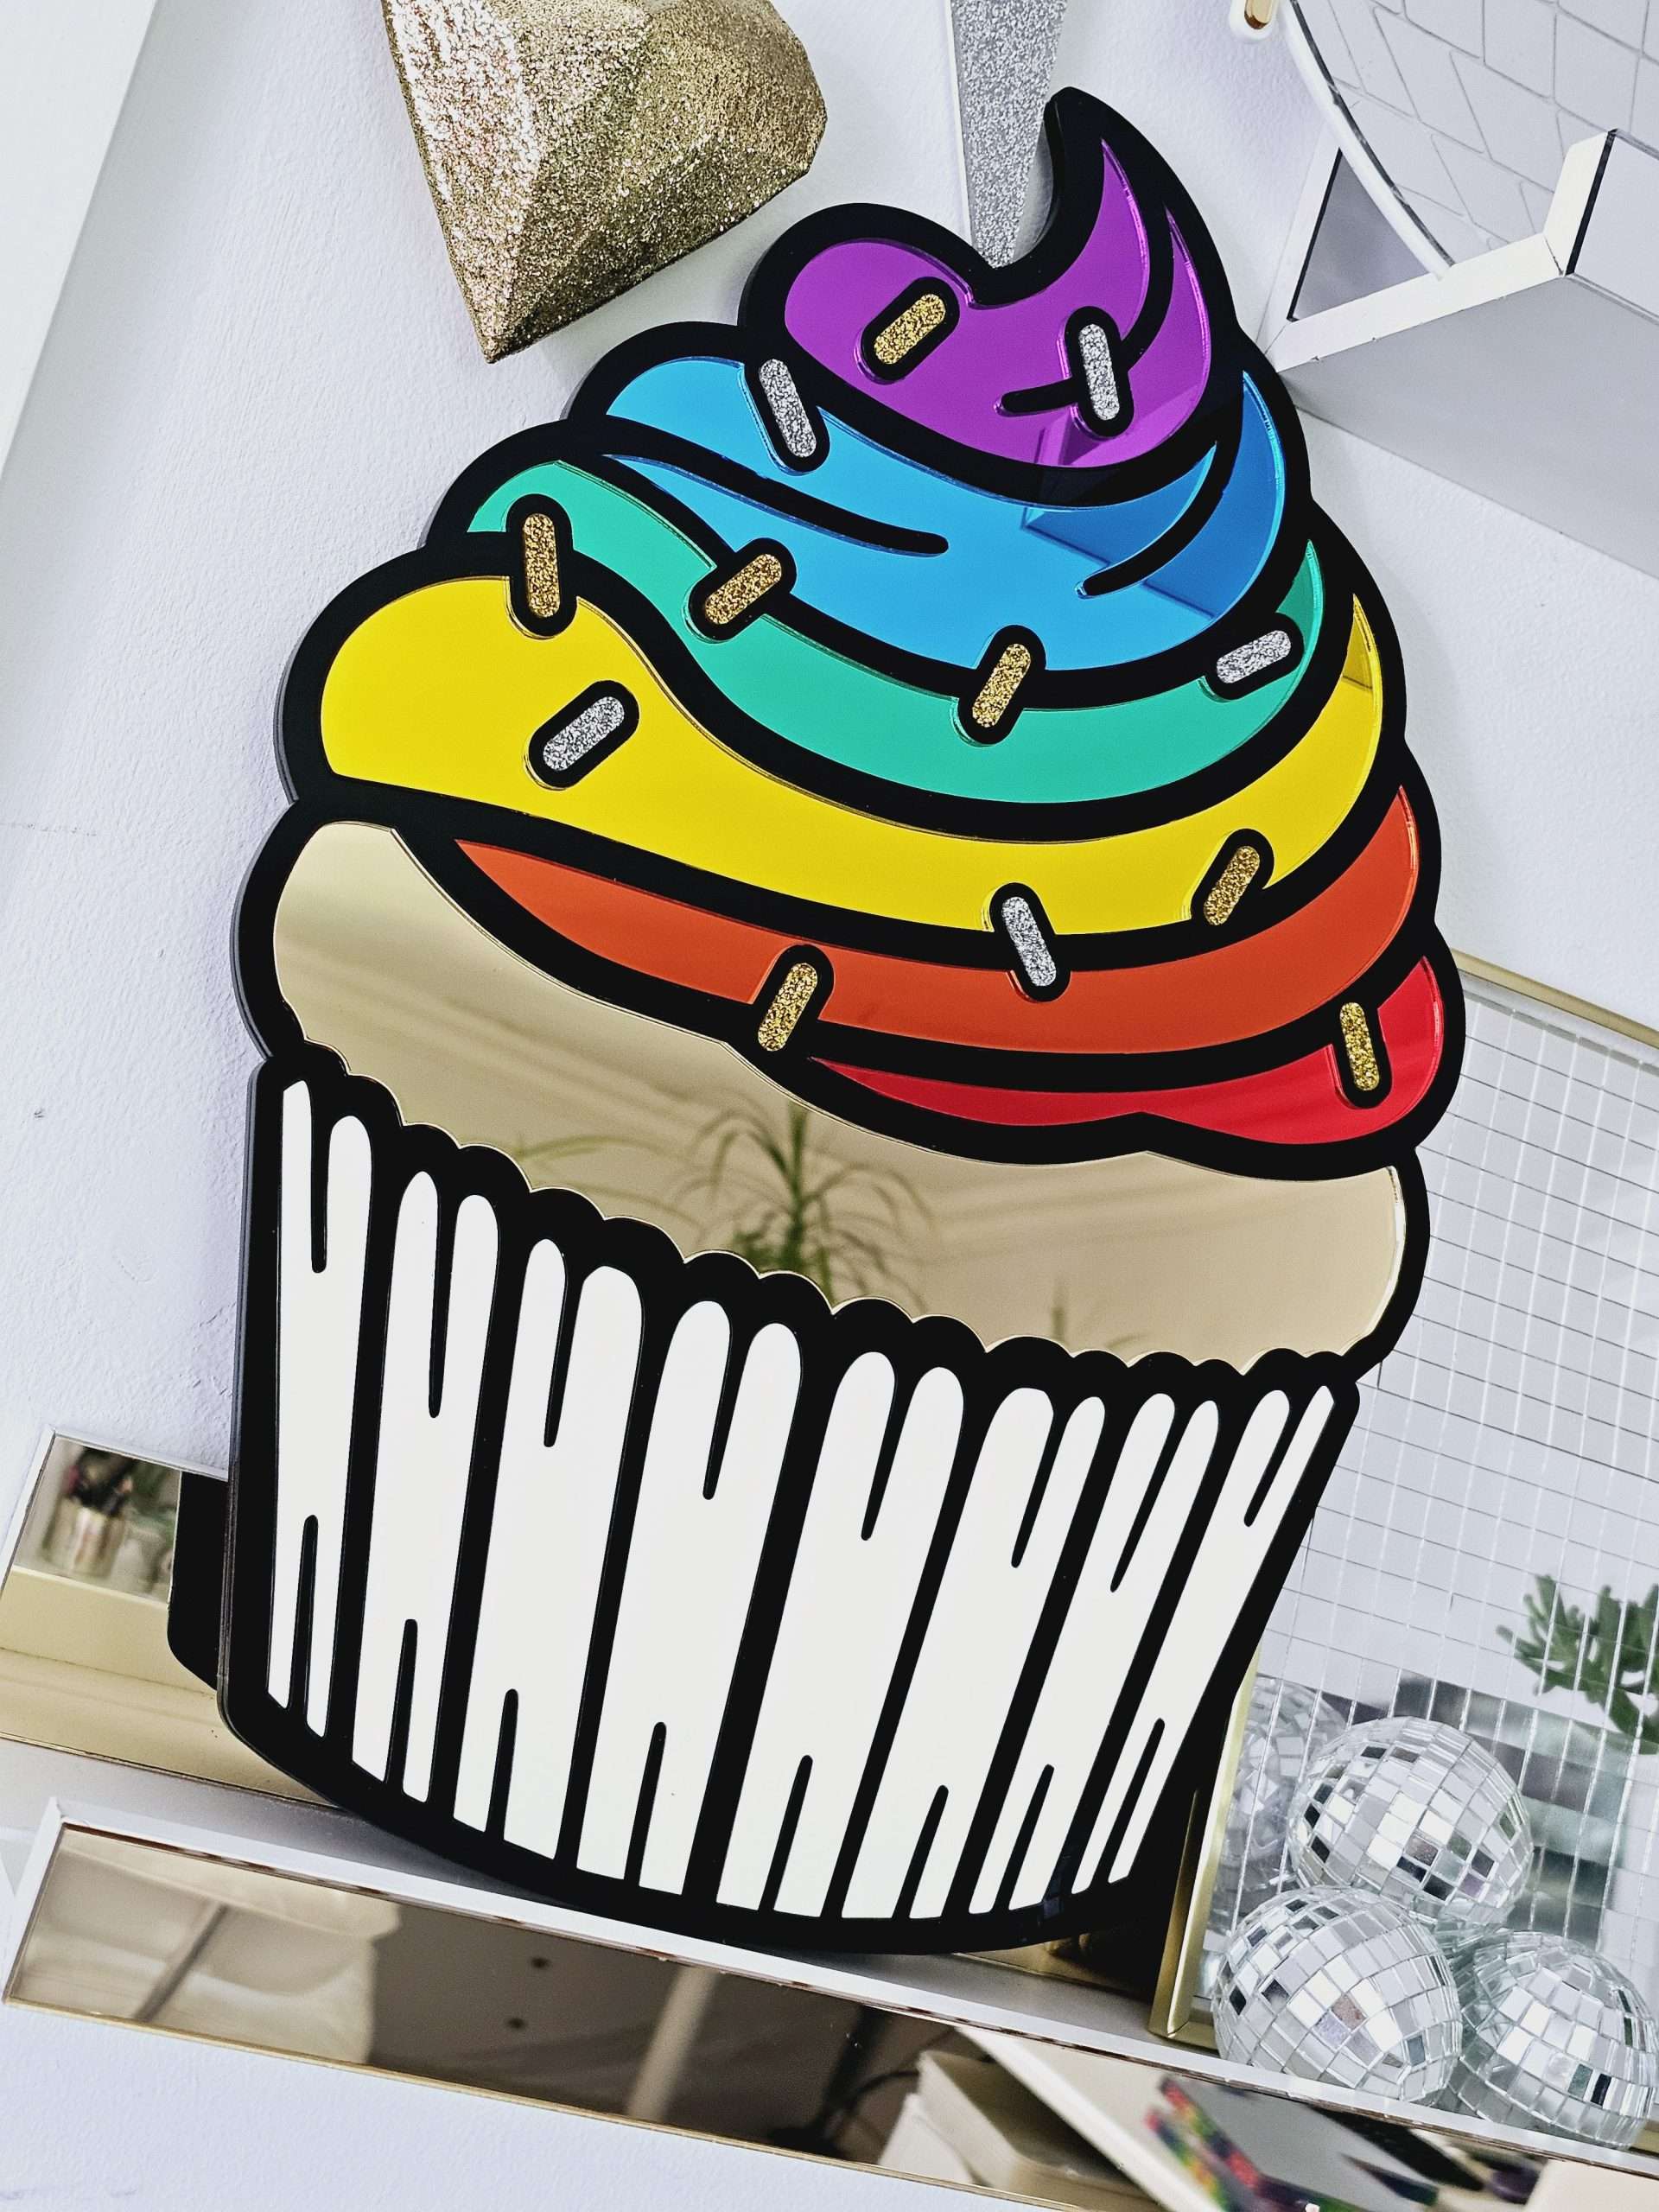 A piece of wall art in the shape of a cupcake. The cupcake has a black outline, rainbow mirror frosting with glitter sprinkles and a matt white cupcake case.